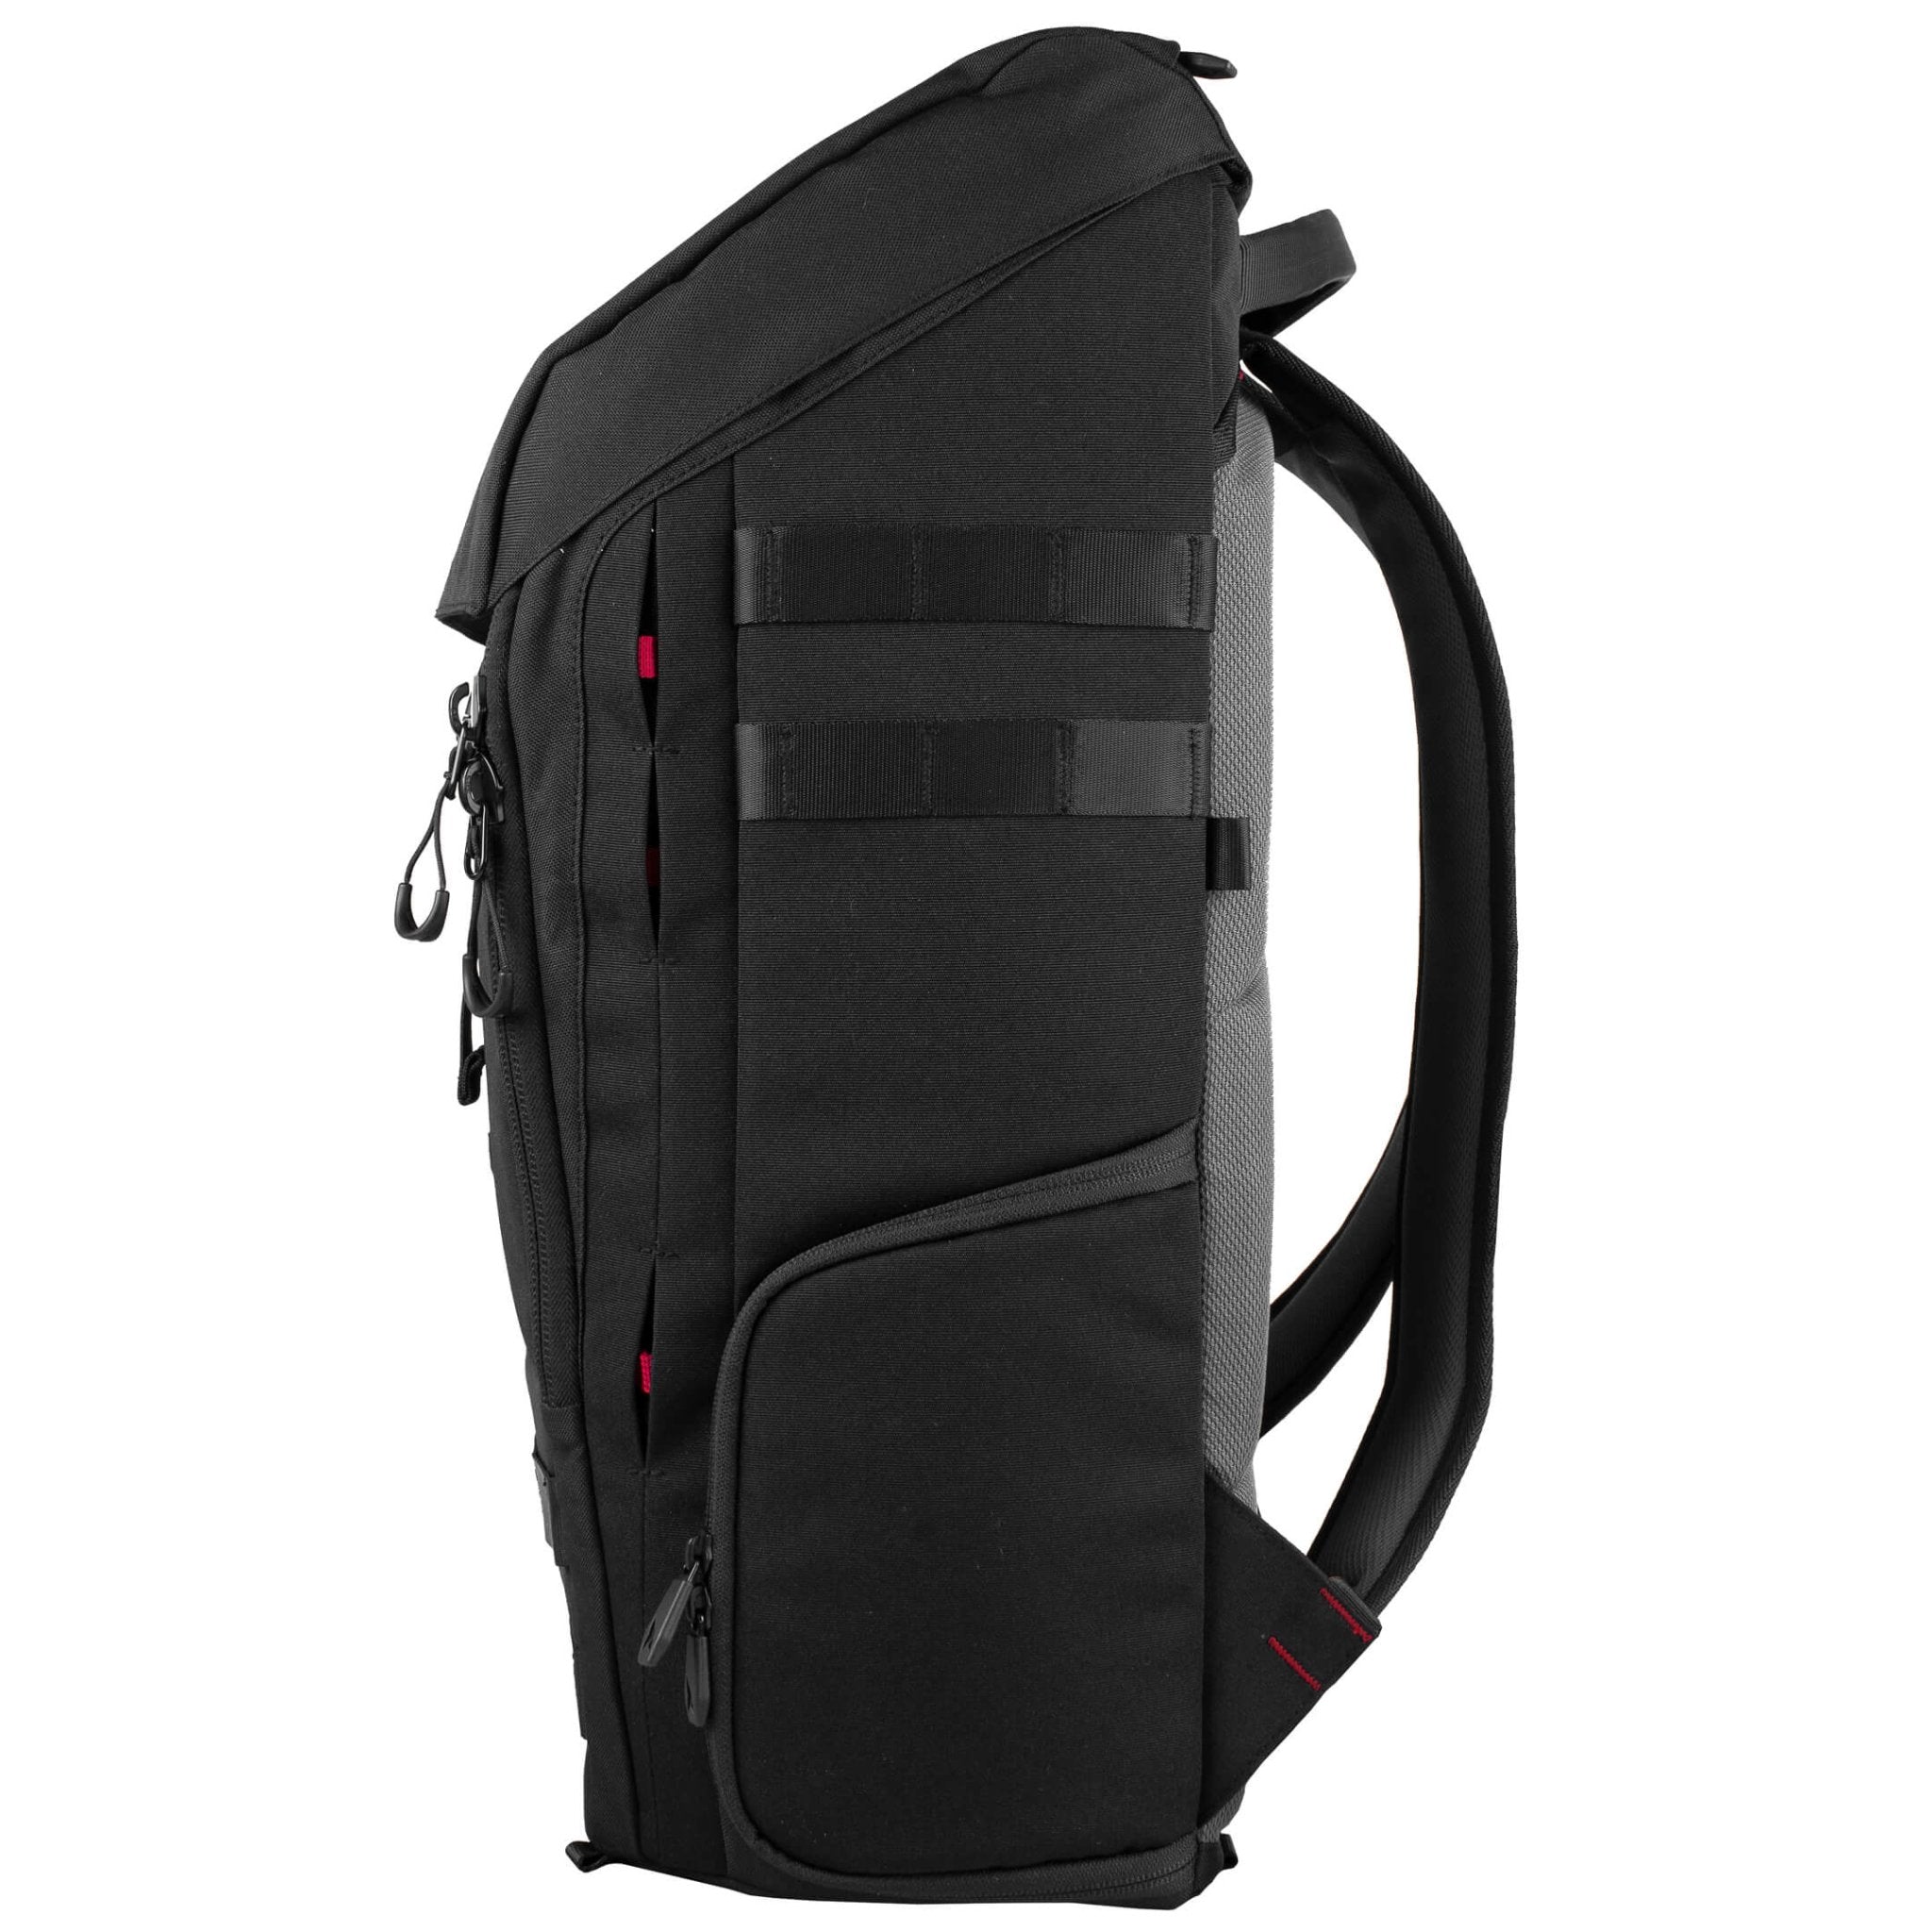 Torvol Urban Carrier Backpack - Your All-Round Freestyle Backpack 3 - Torvol - Drone Authority